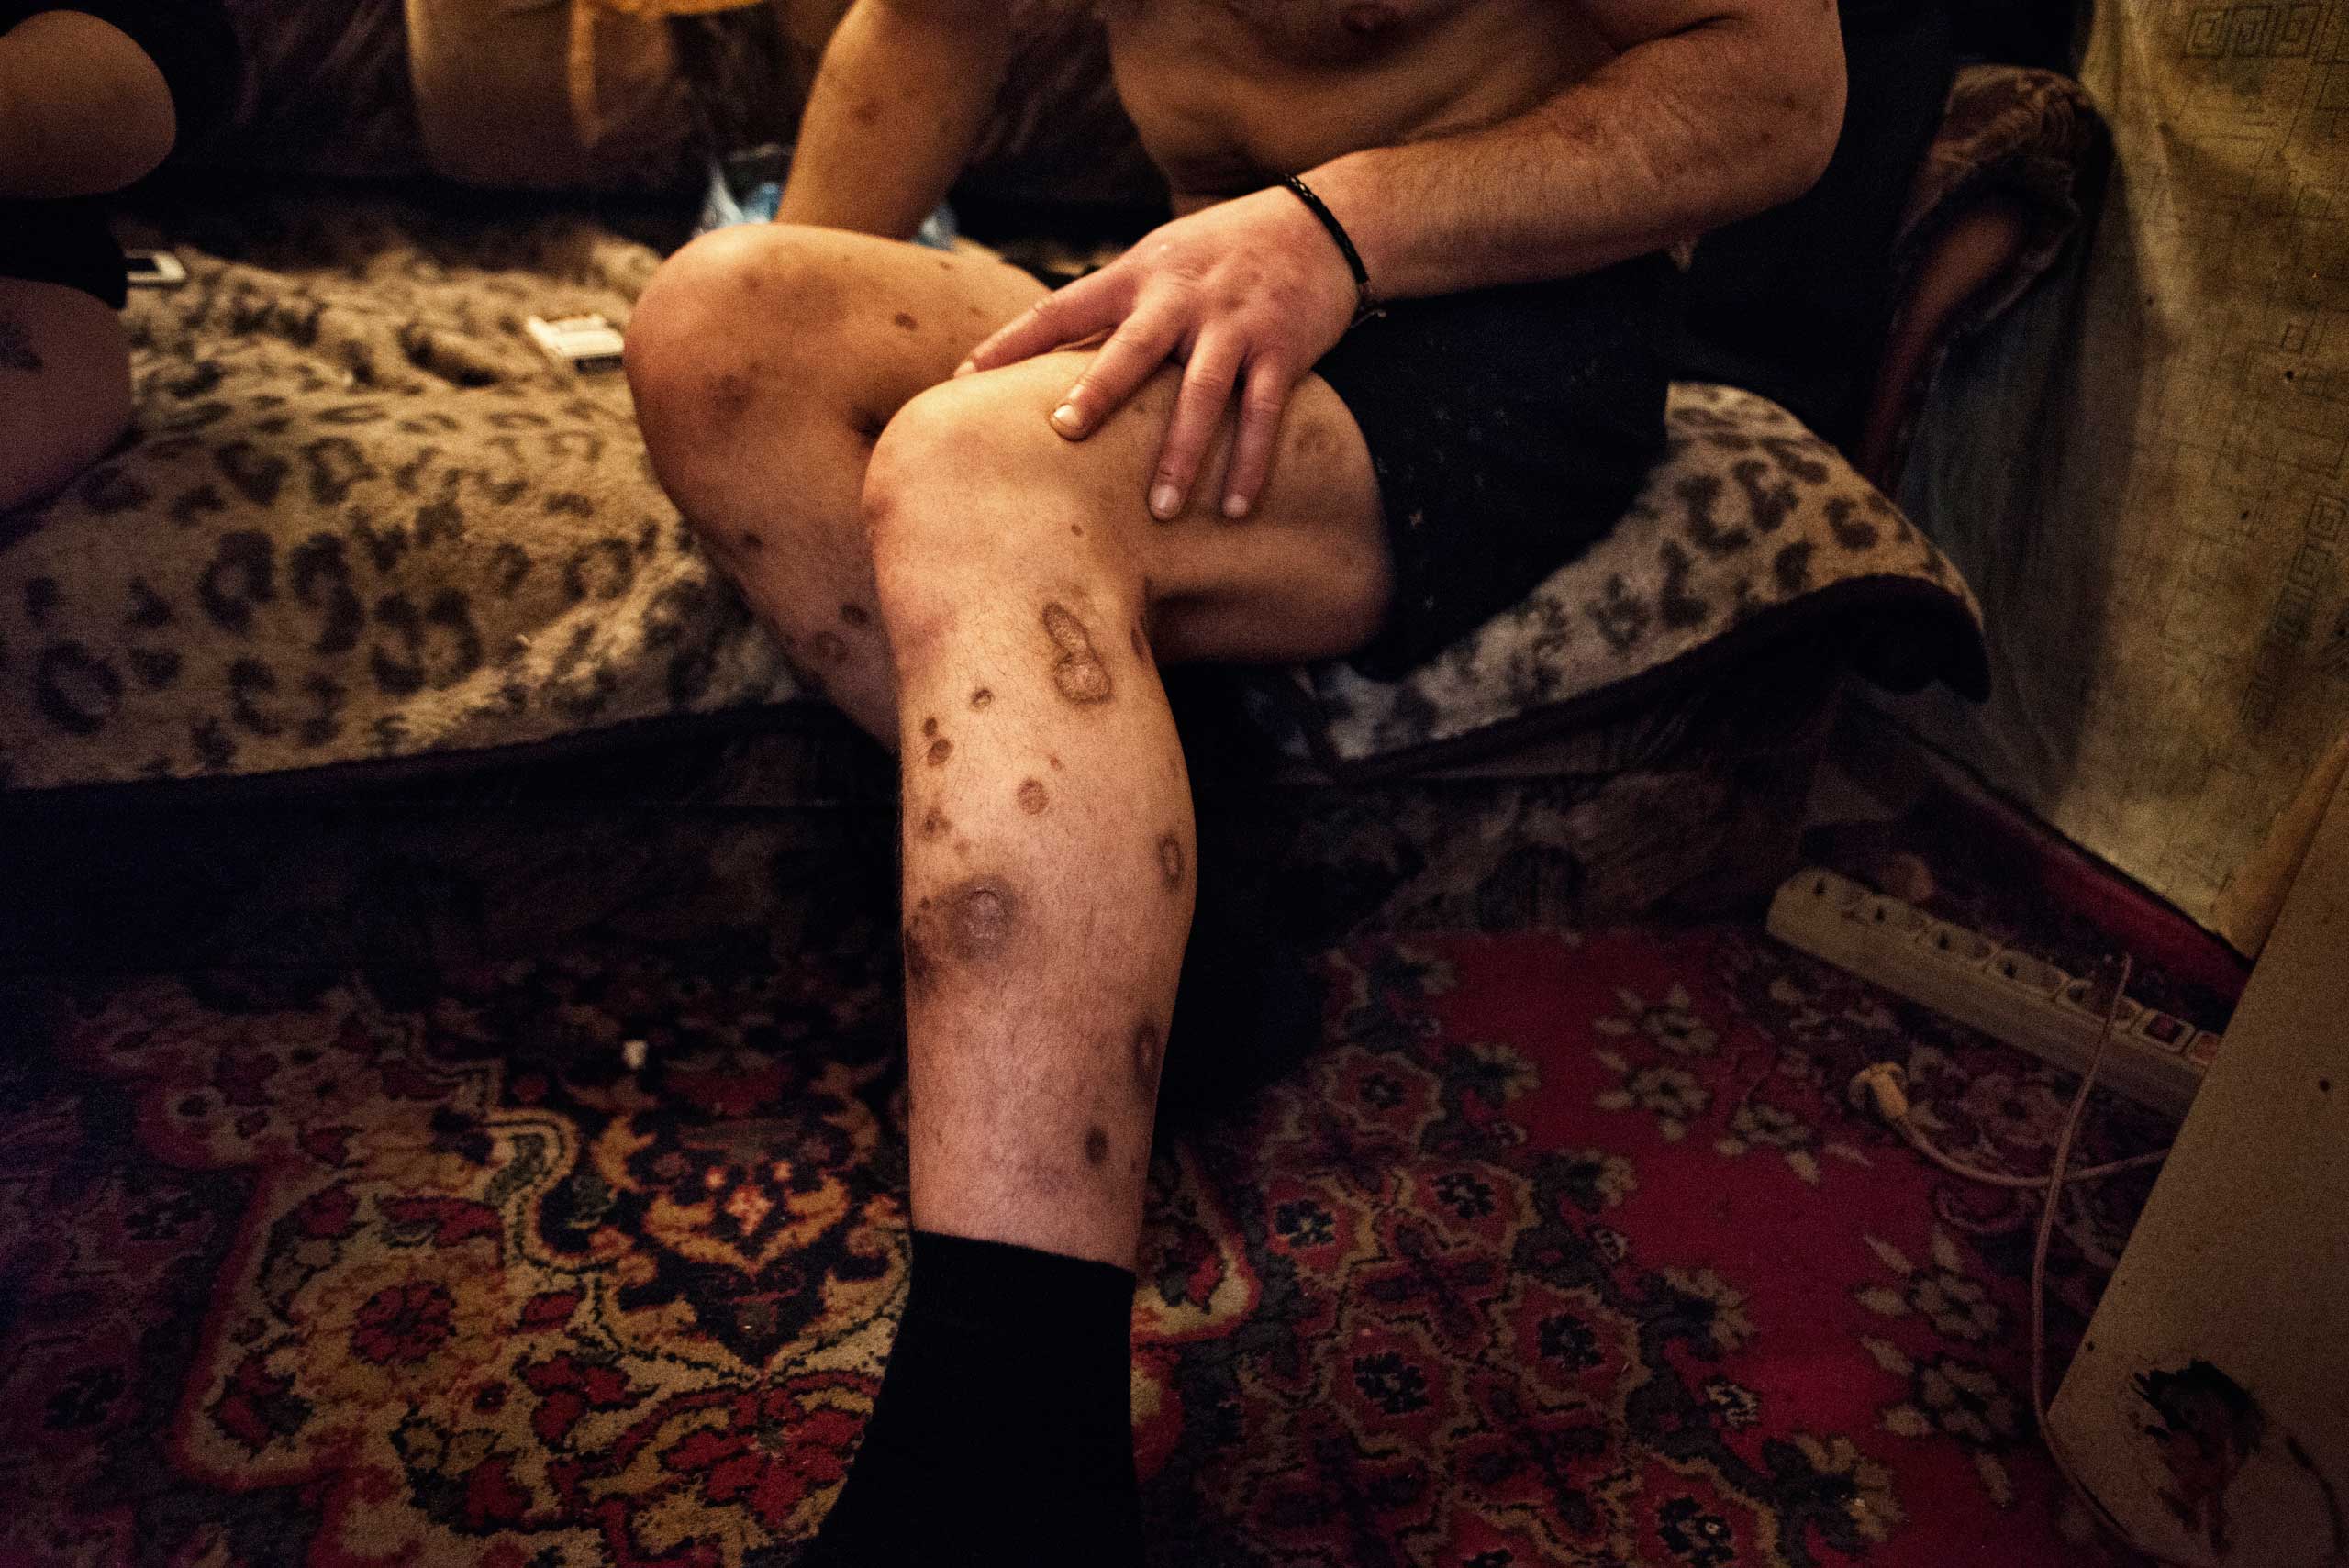 Elman, 40 years old, displays the injuries on his legs which hes says were caused by the use of krokodil and methadone.